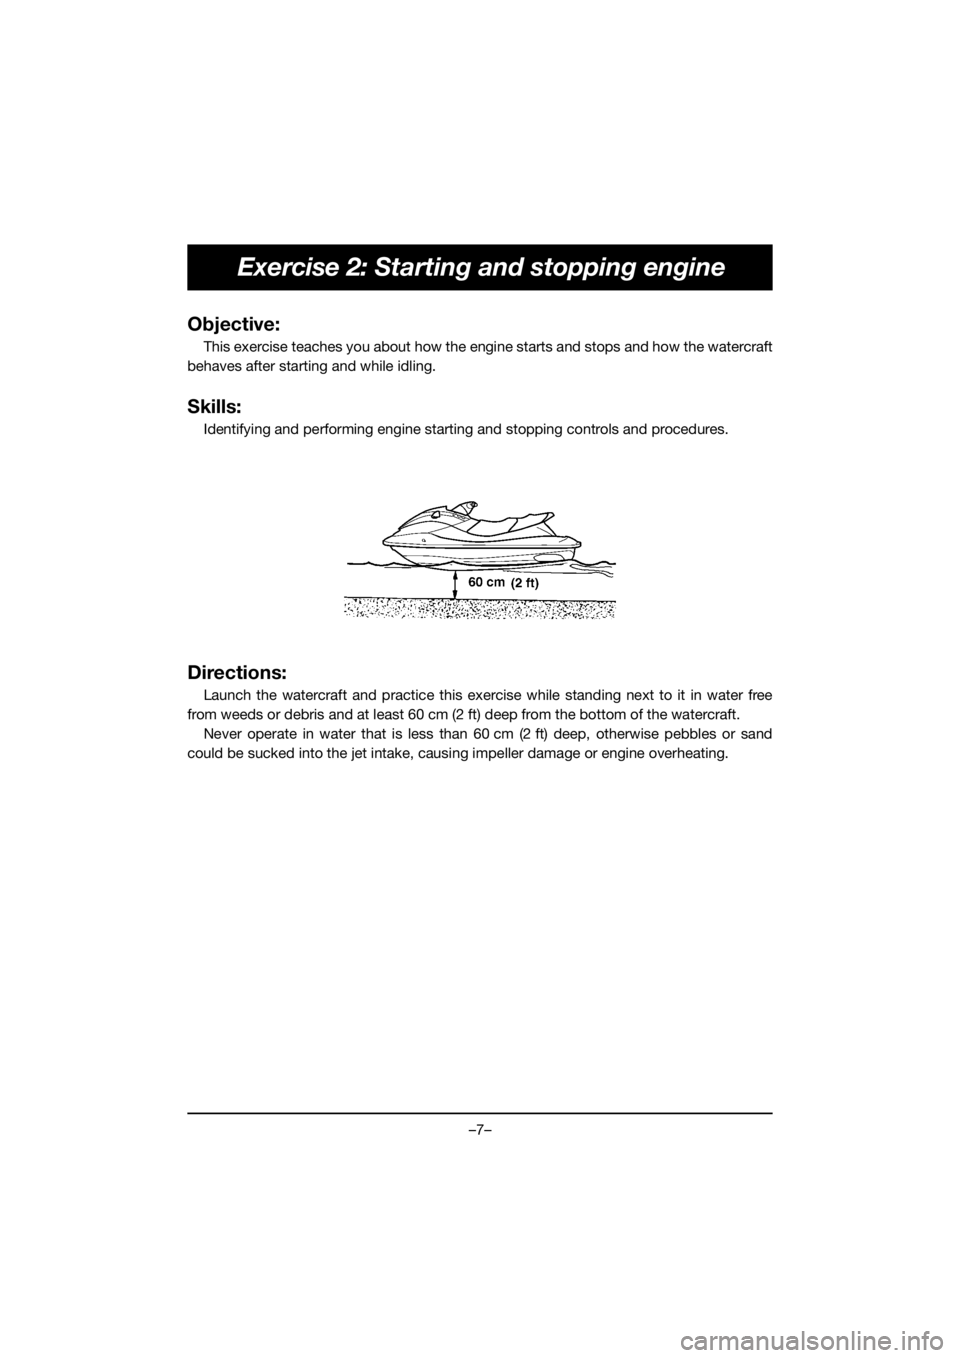 YAMAHA EXR 2020  Bruksanvisningar (in Swedish) –7–
Exercise 2: Starting and stopping engine
Objective:
This exercise teaches you about how the engine starts and stops and how the watercraft
behaves after starting and while idling.
Skills:
Iden